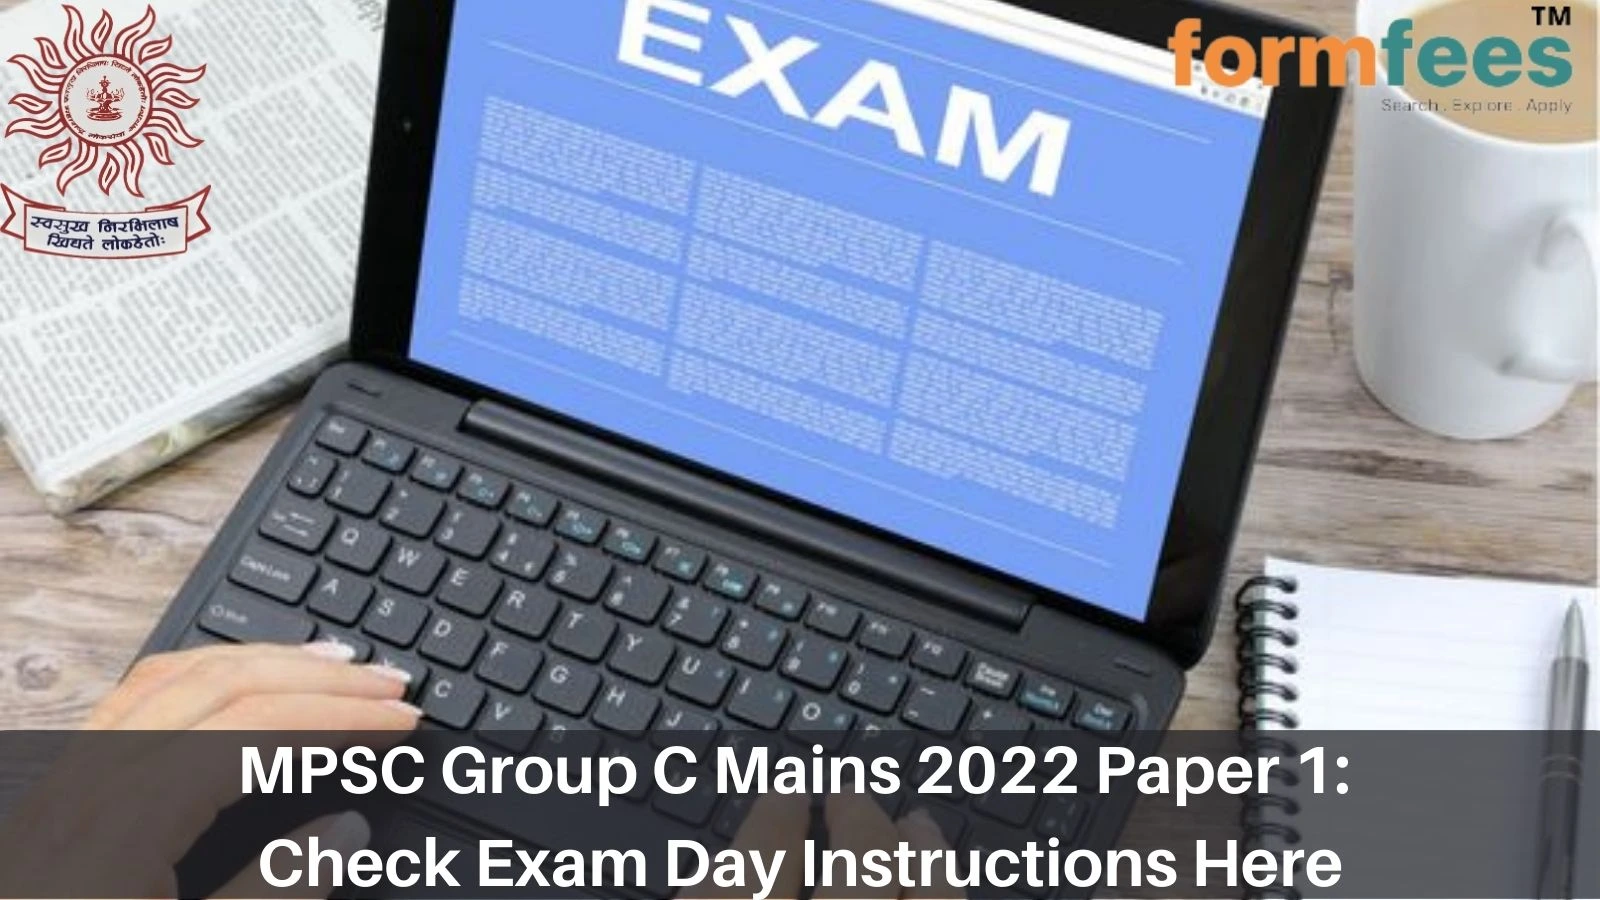 MPSC Group C Mains 2022 Paper 1: Check Exam Day Instructions Here